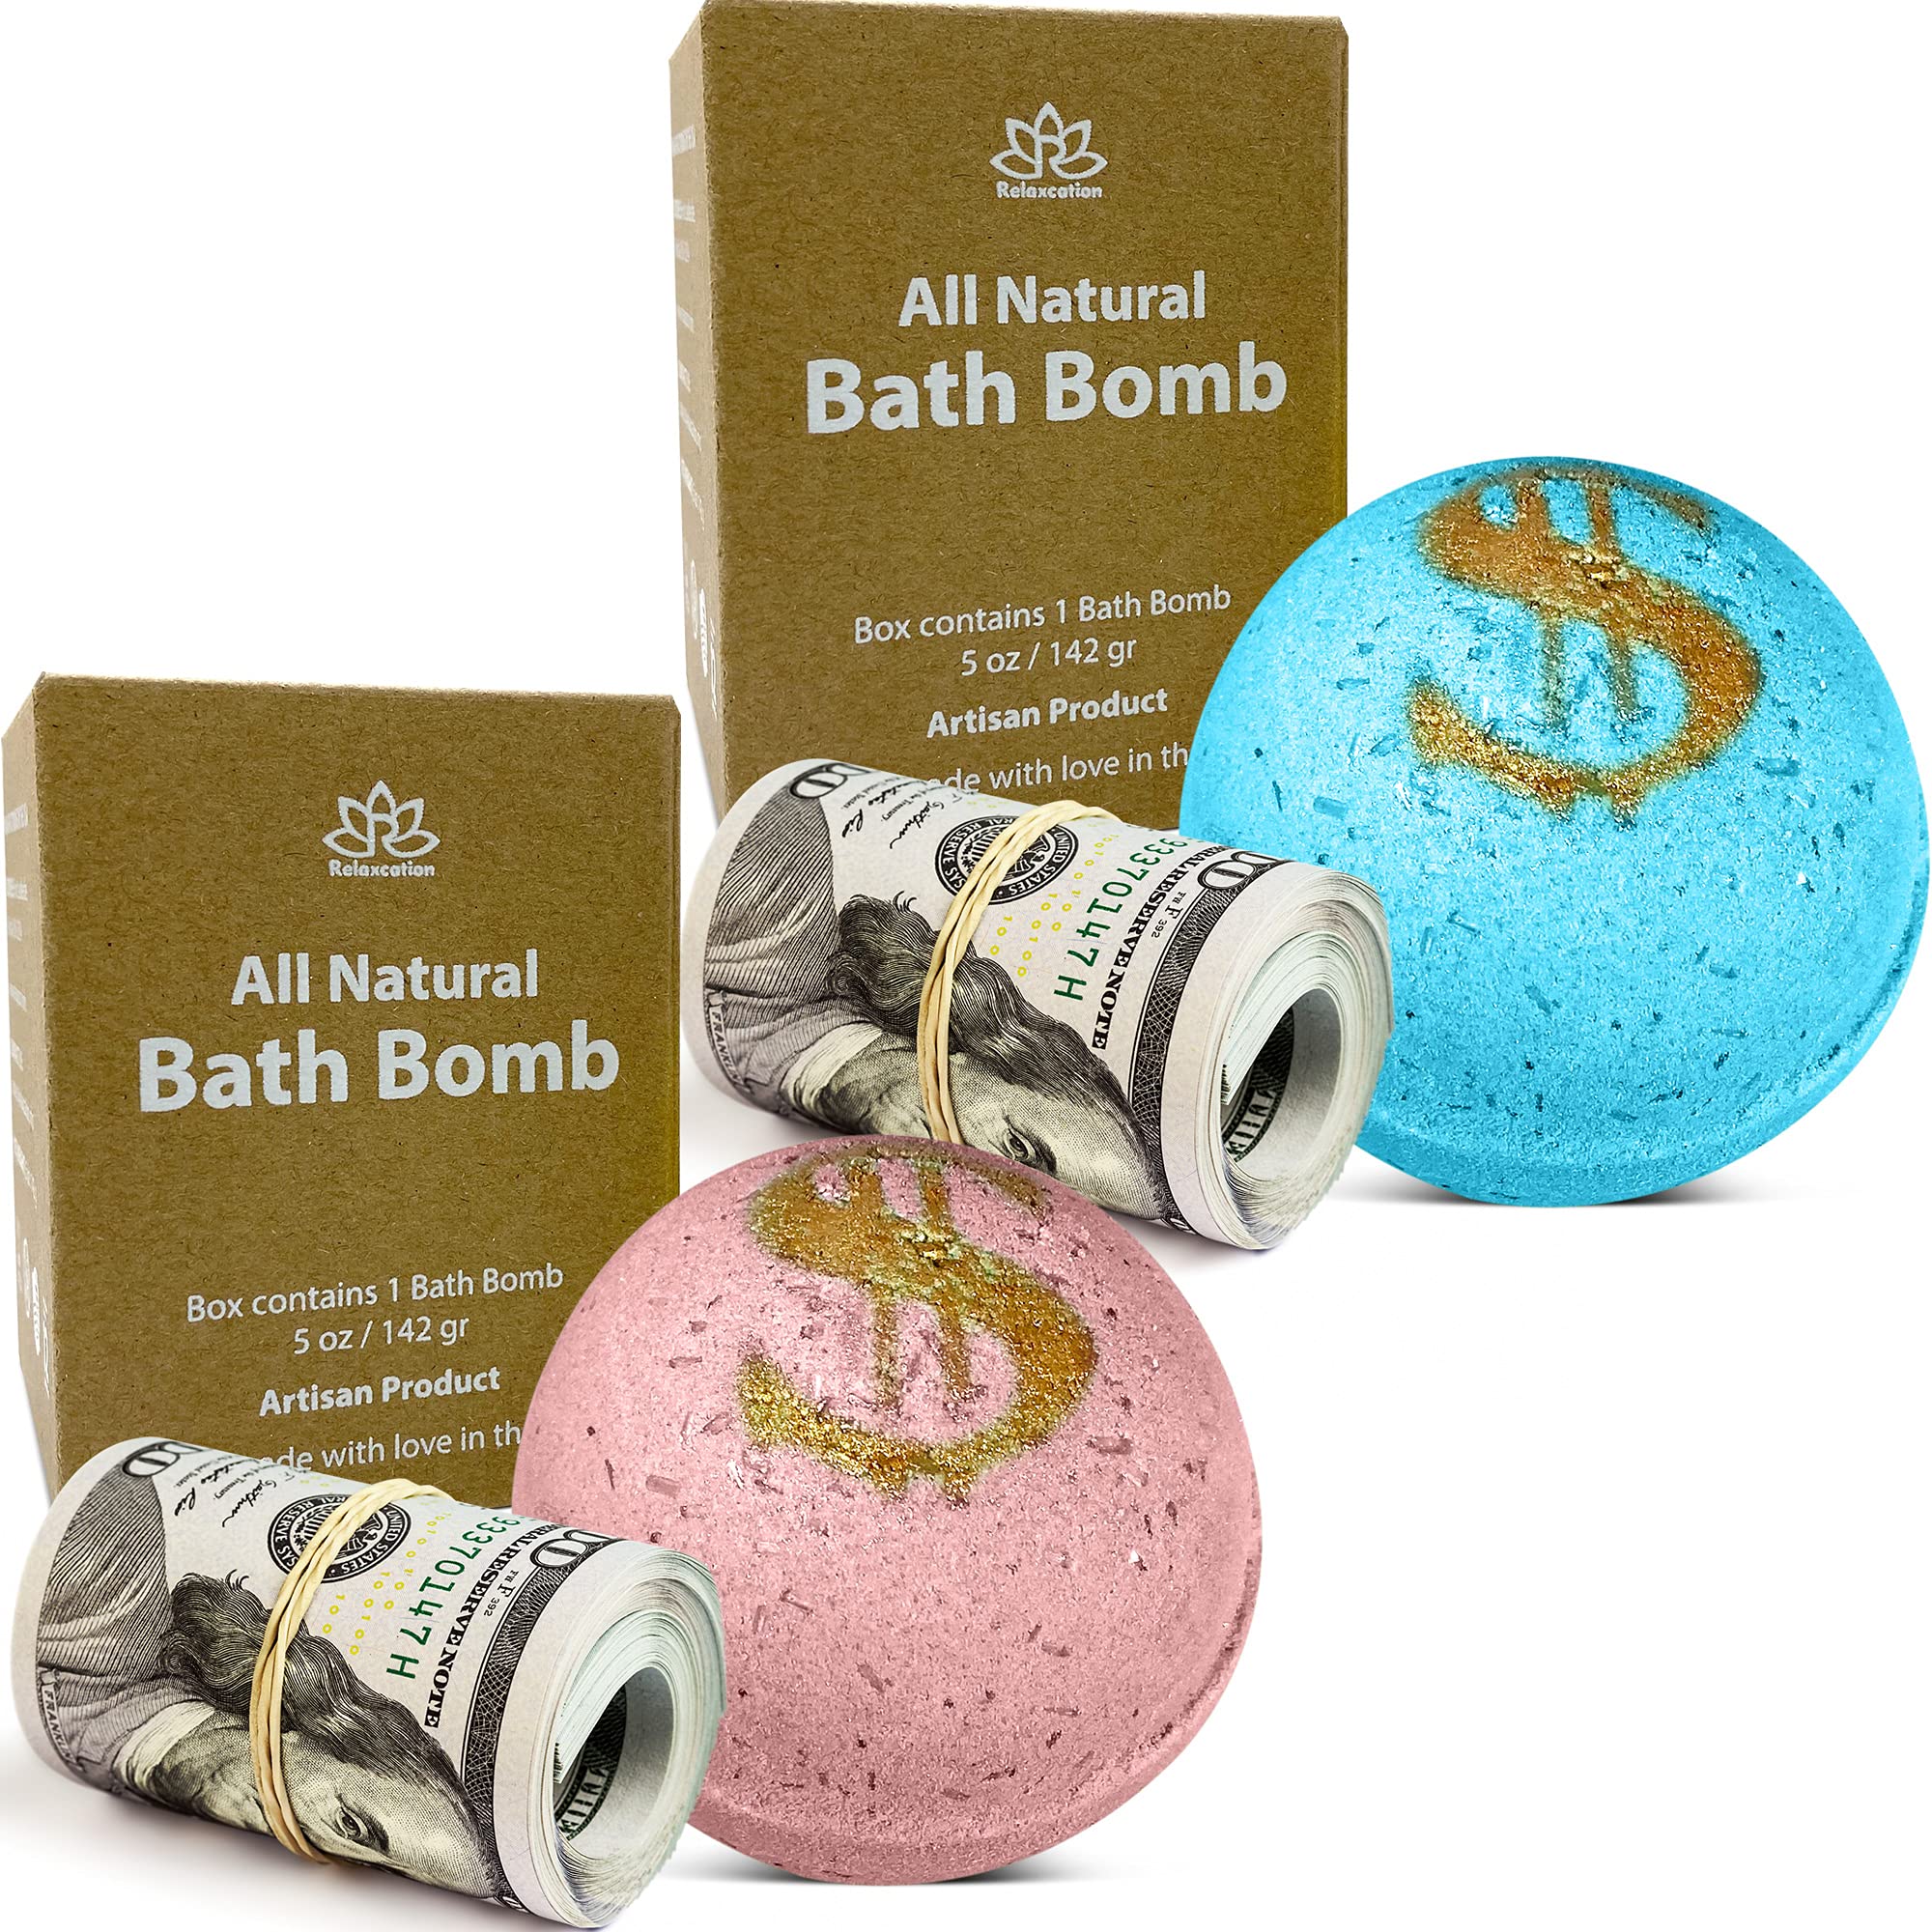 1 Money Soap Bar with Real Cash Inside Up to $100 Bill Inside in Each Bar –  RELAXCATION